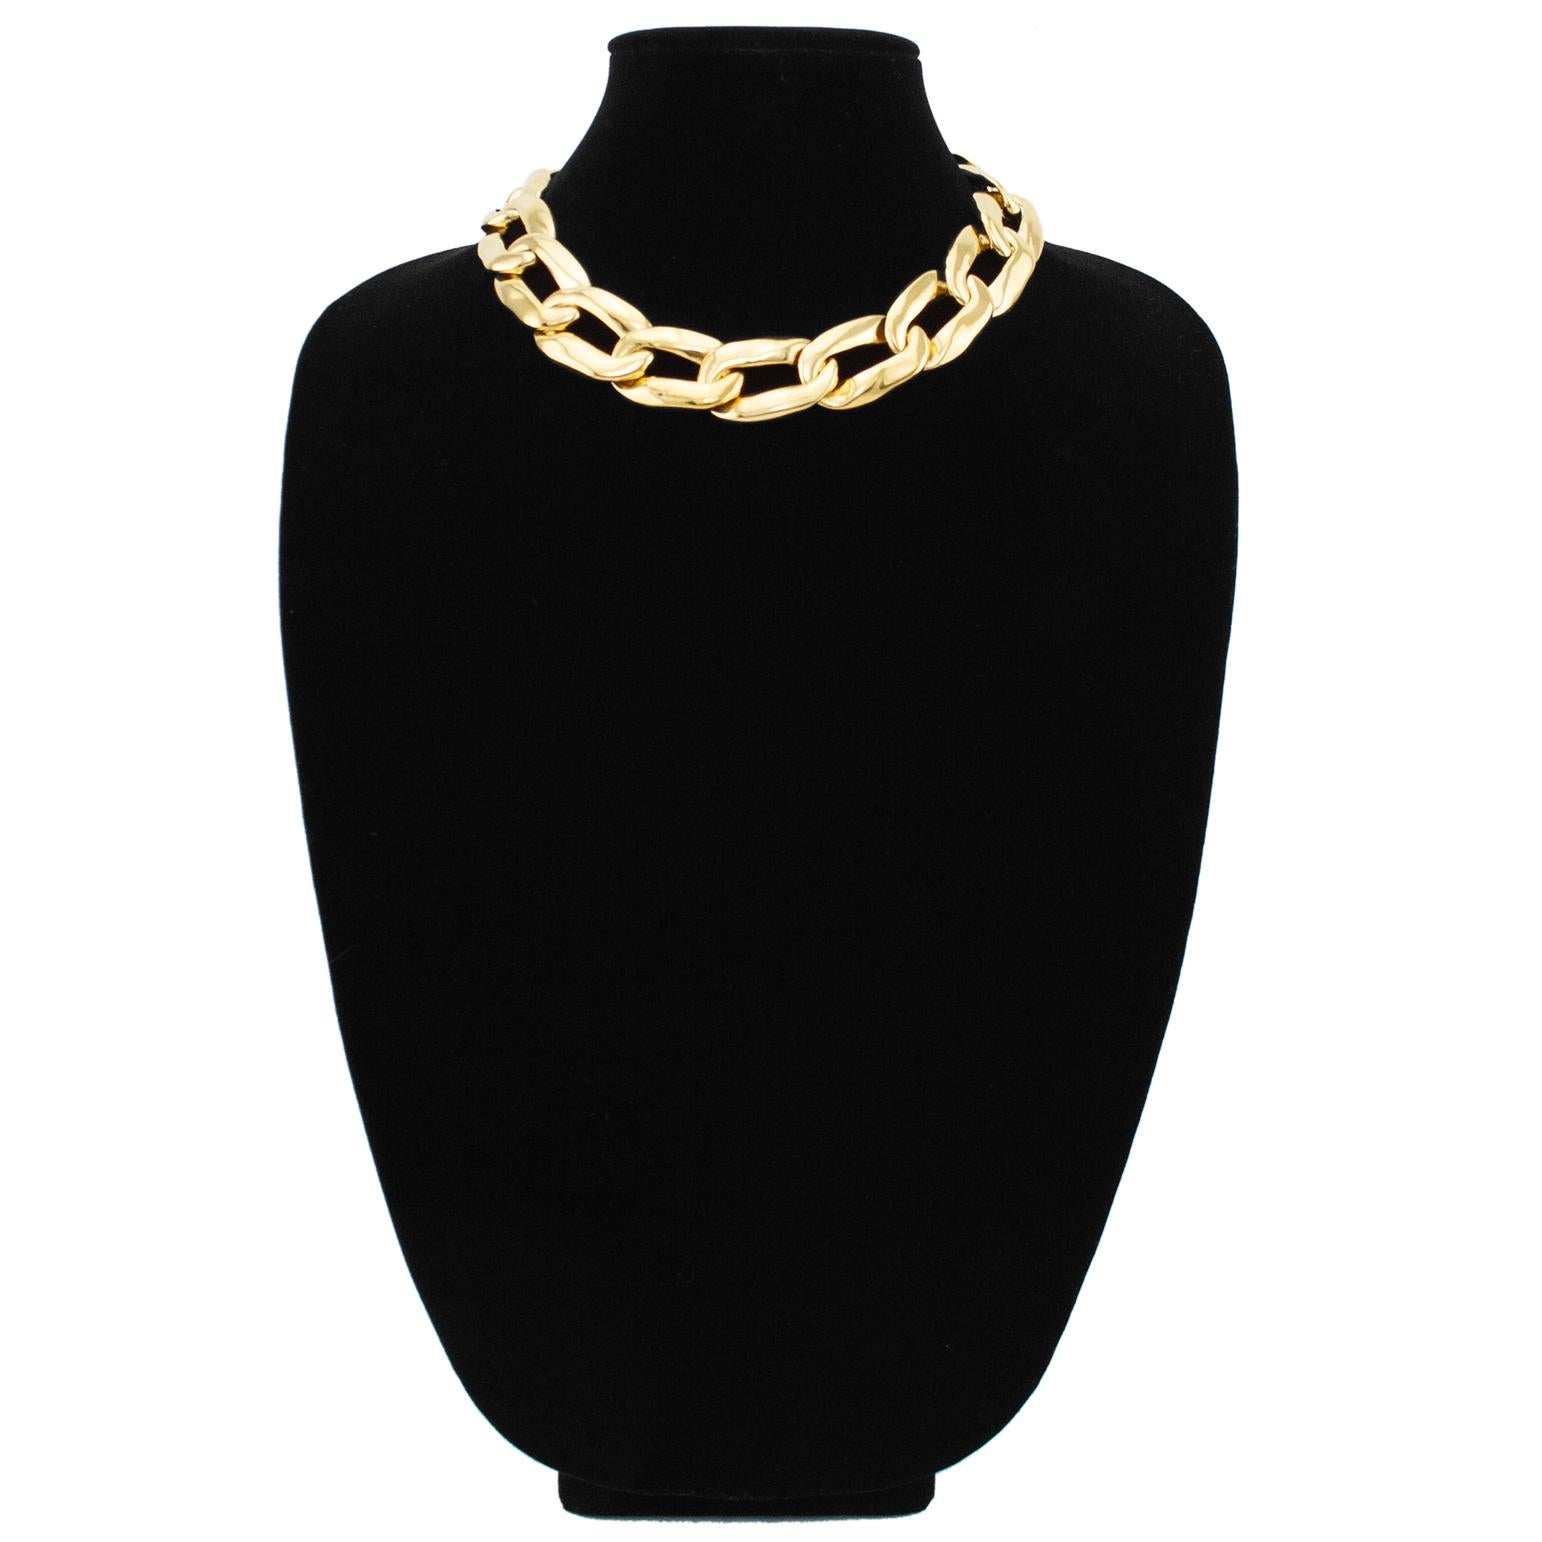 Mid 1980's YSL gilt metal oversized chain link necklace. Adjustable at the back to fit loose or choker style. This is a classic piece of fashion jewelry that Yves Saint Laurent repeated every decade with slight variations. This version has large